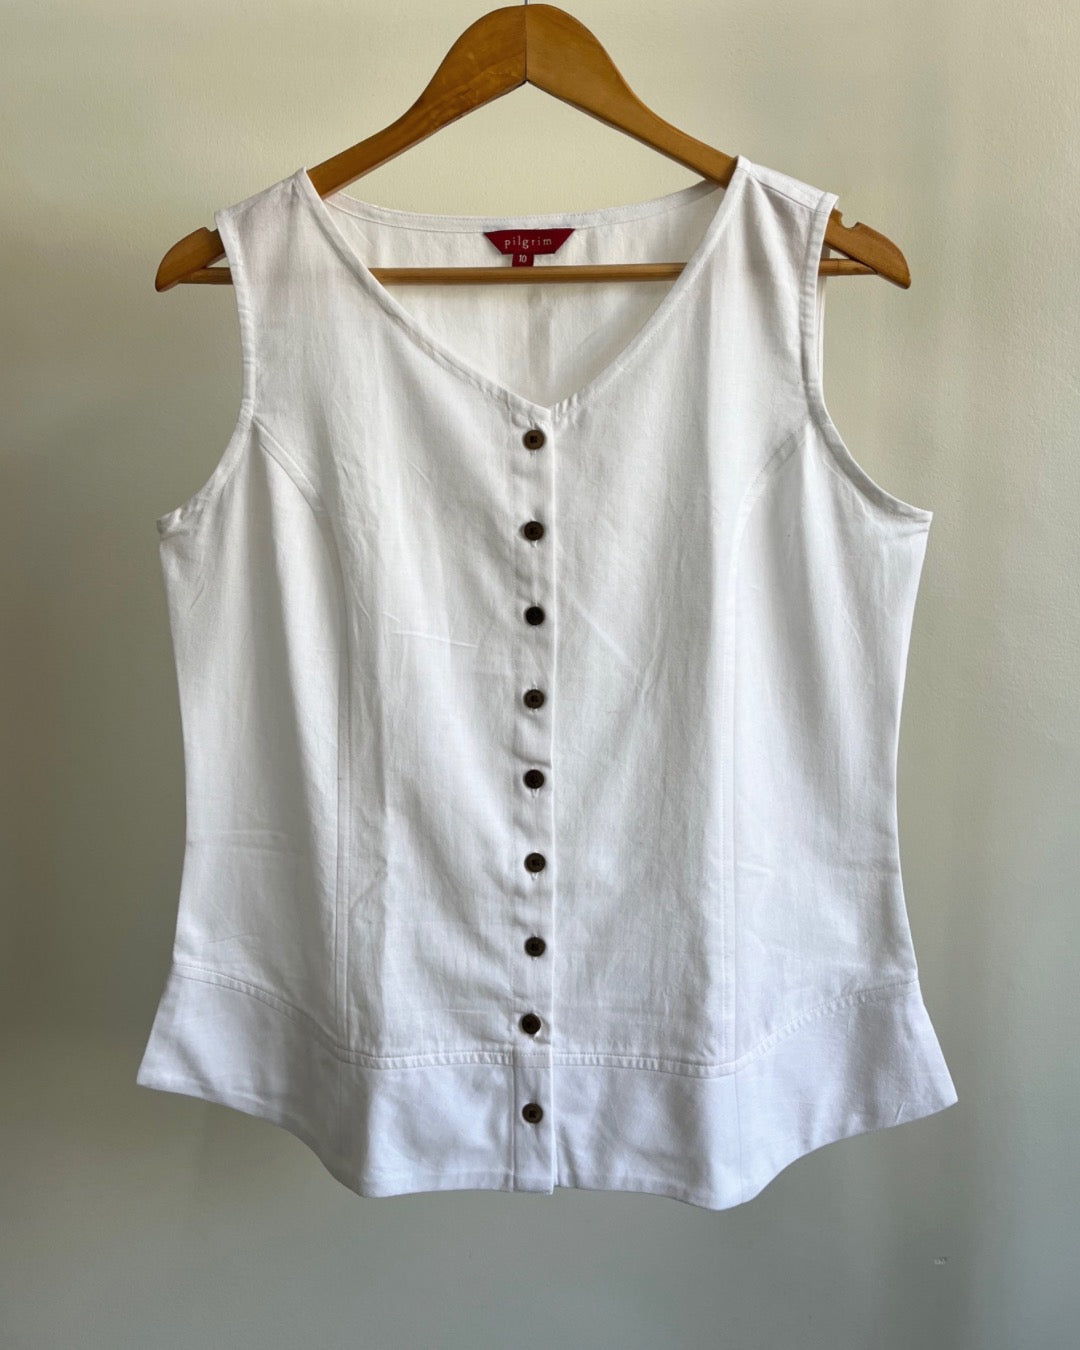 Butterfly Jacket Top - White Cotton